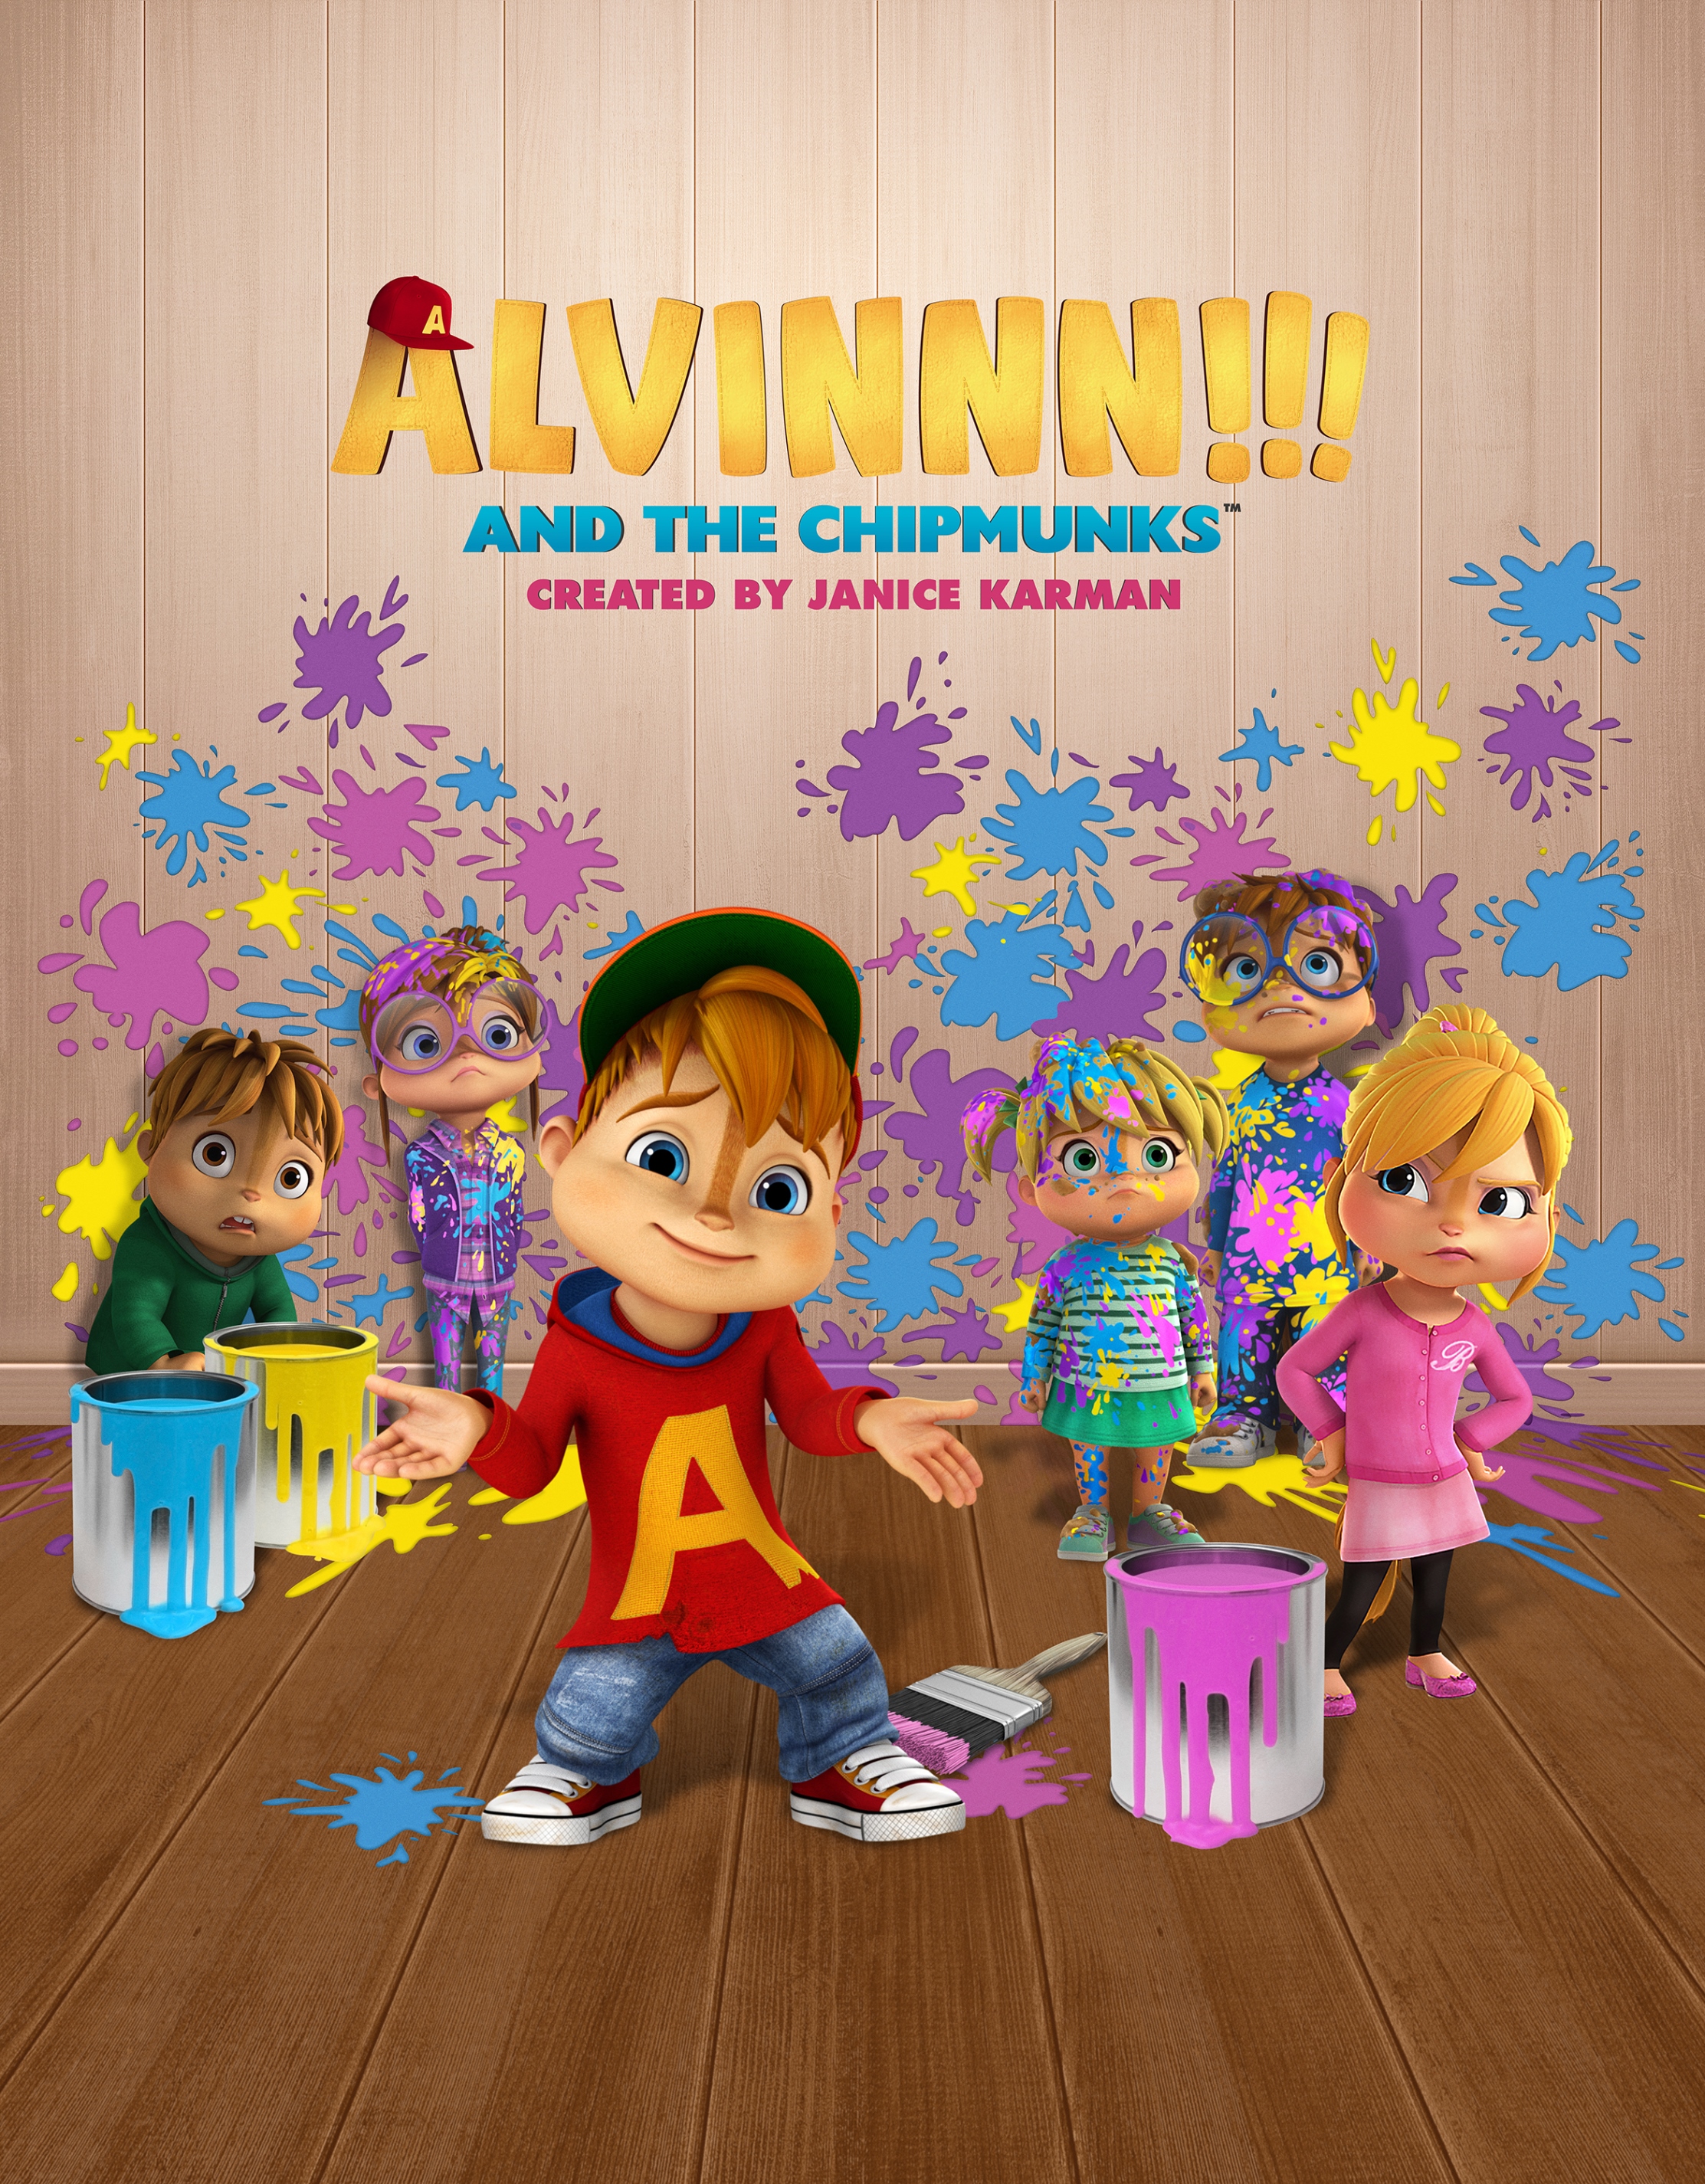 ALVINNN!!! and the Chipmunks - Where to Watch and Stream - TV Guide